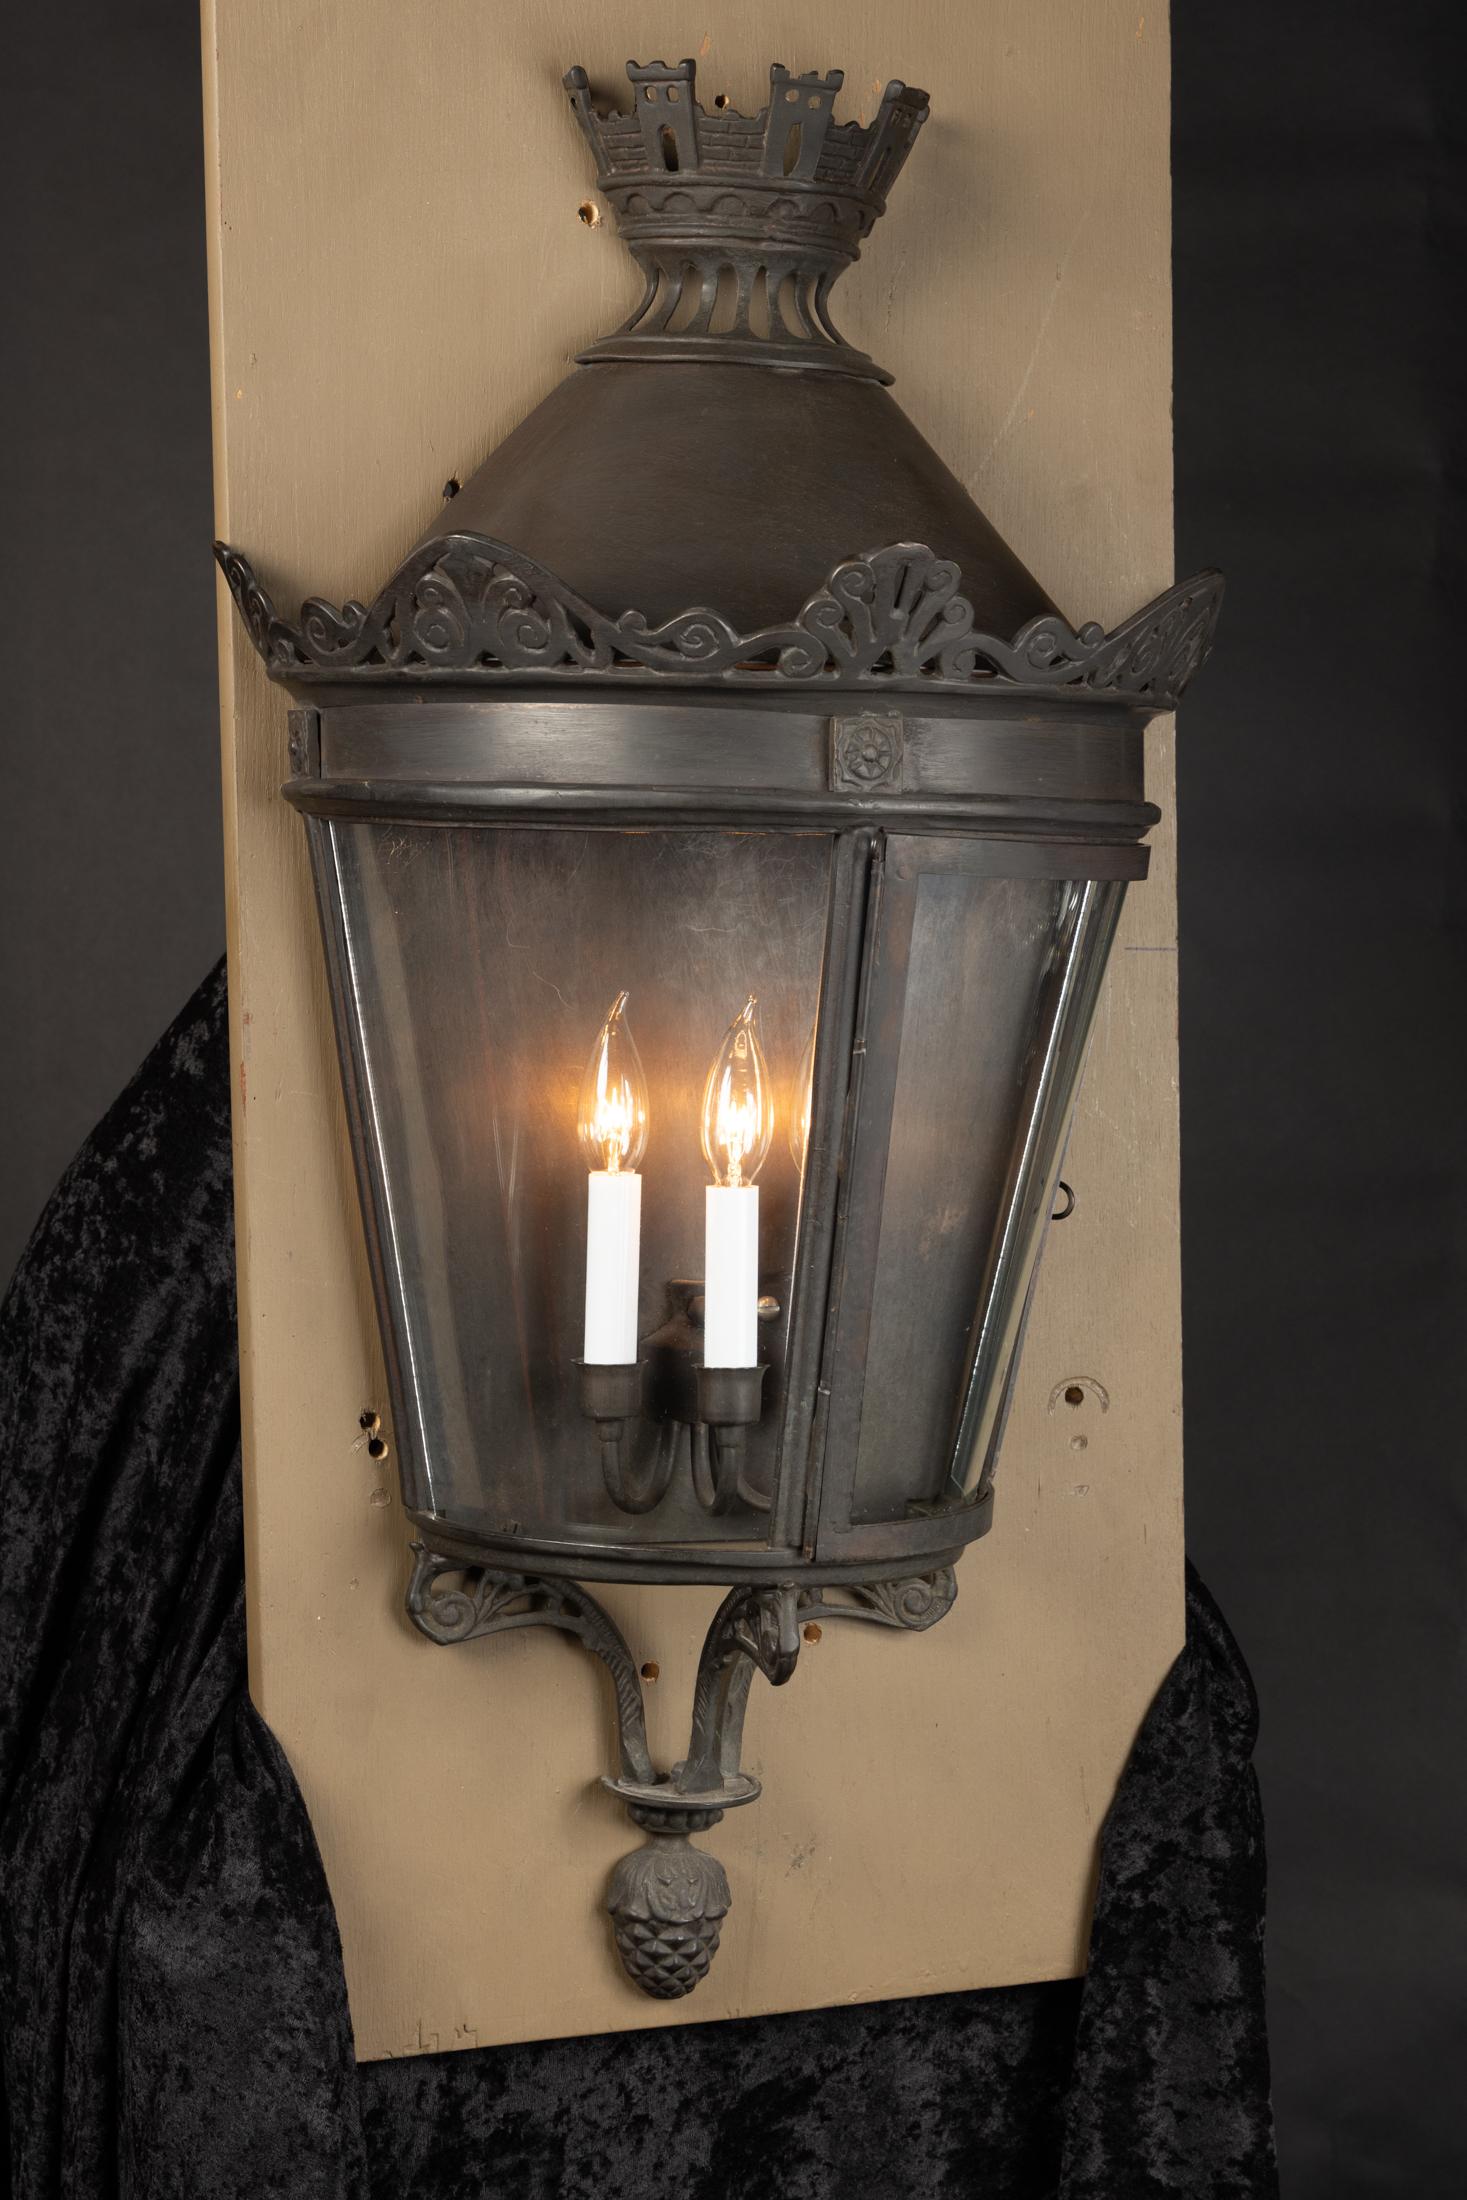 This beautiful pair of Italian semi-circular oscuro (dark) bronze wall lanterns features curved glass panes and made to resemble Parisian street lights of the 19th Century. The pair dates back to the 1950s and features a crown of castles at